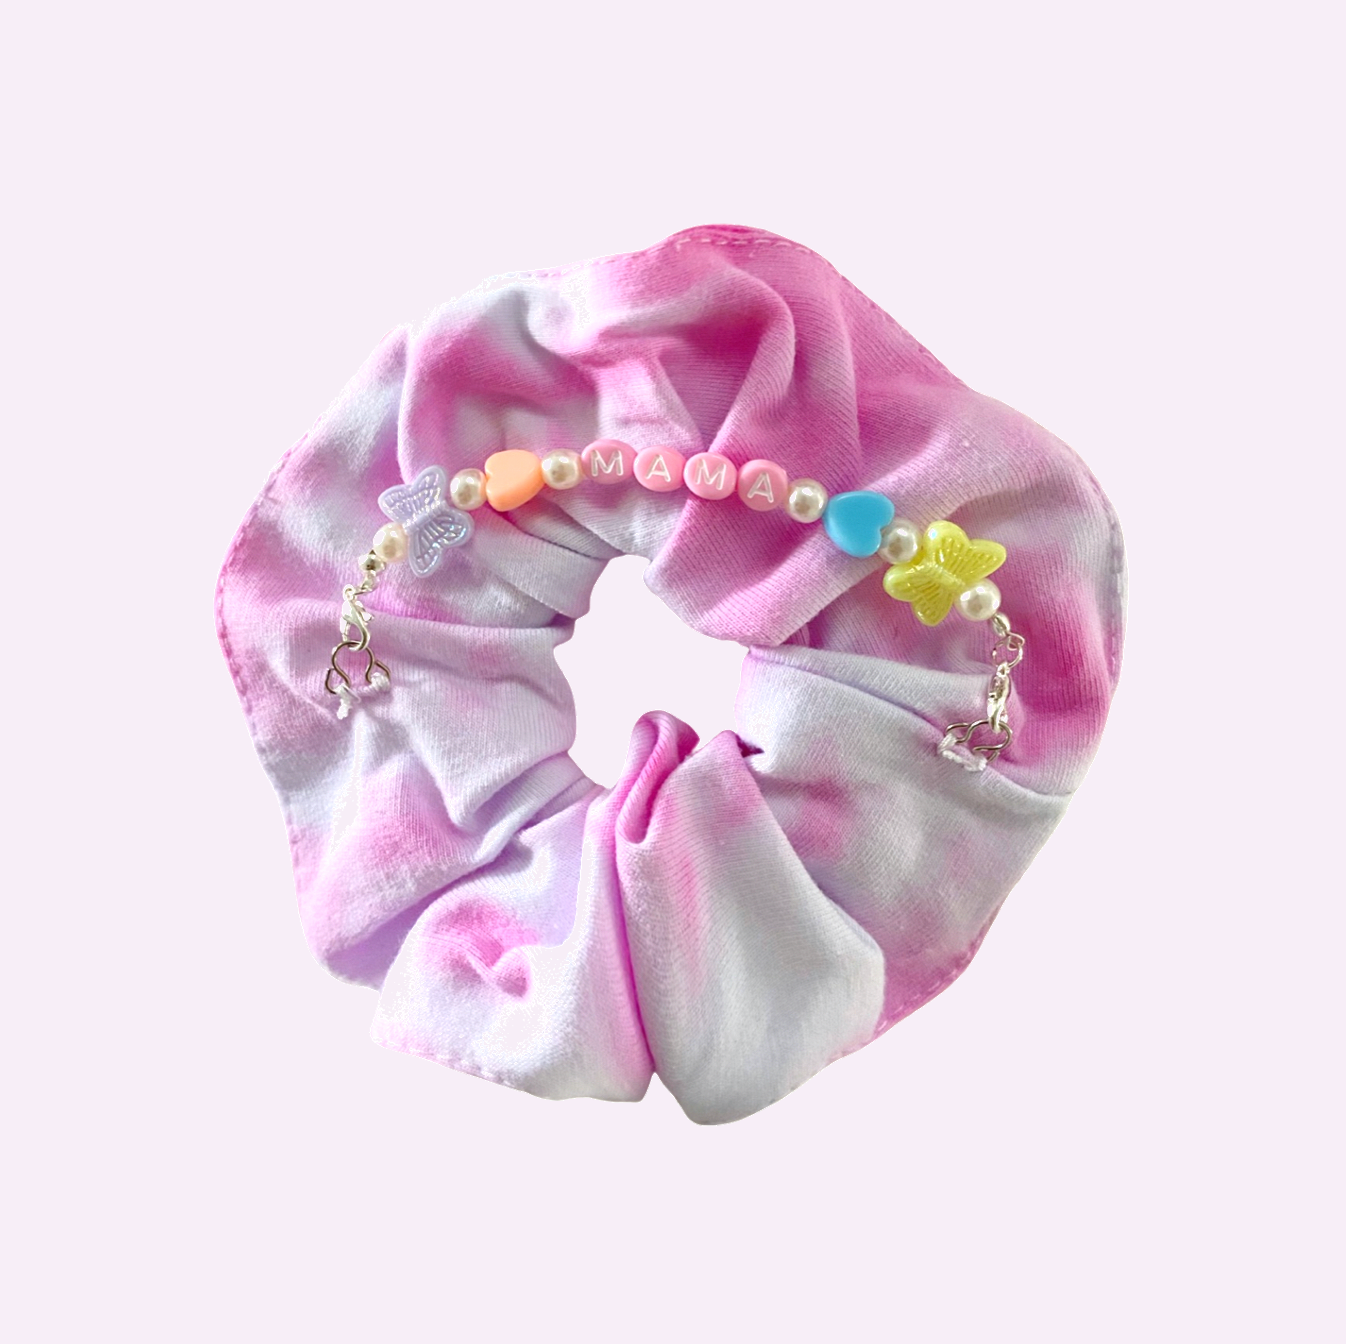 Load image into Gallery viewer, MAMA SCRUNCHIE ♡ tie-dye scrunchie with mama beads by Aura Sugar Co.
